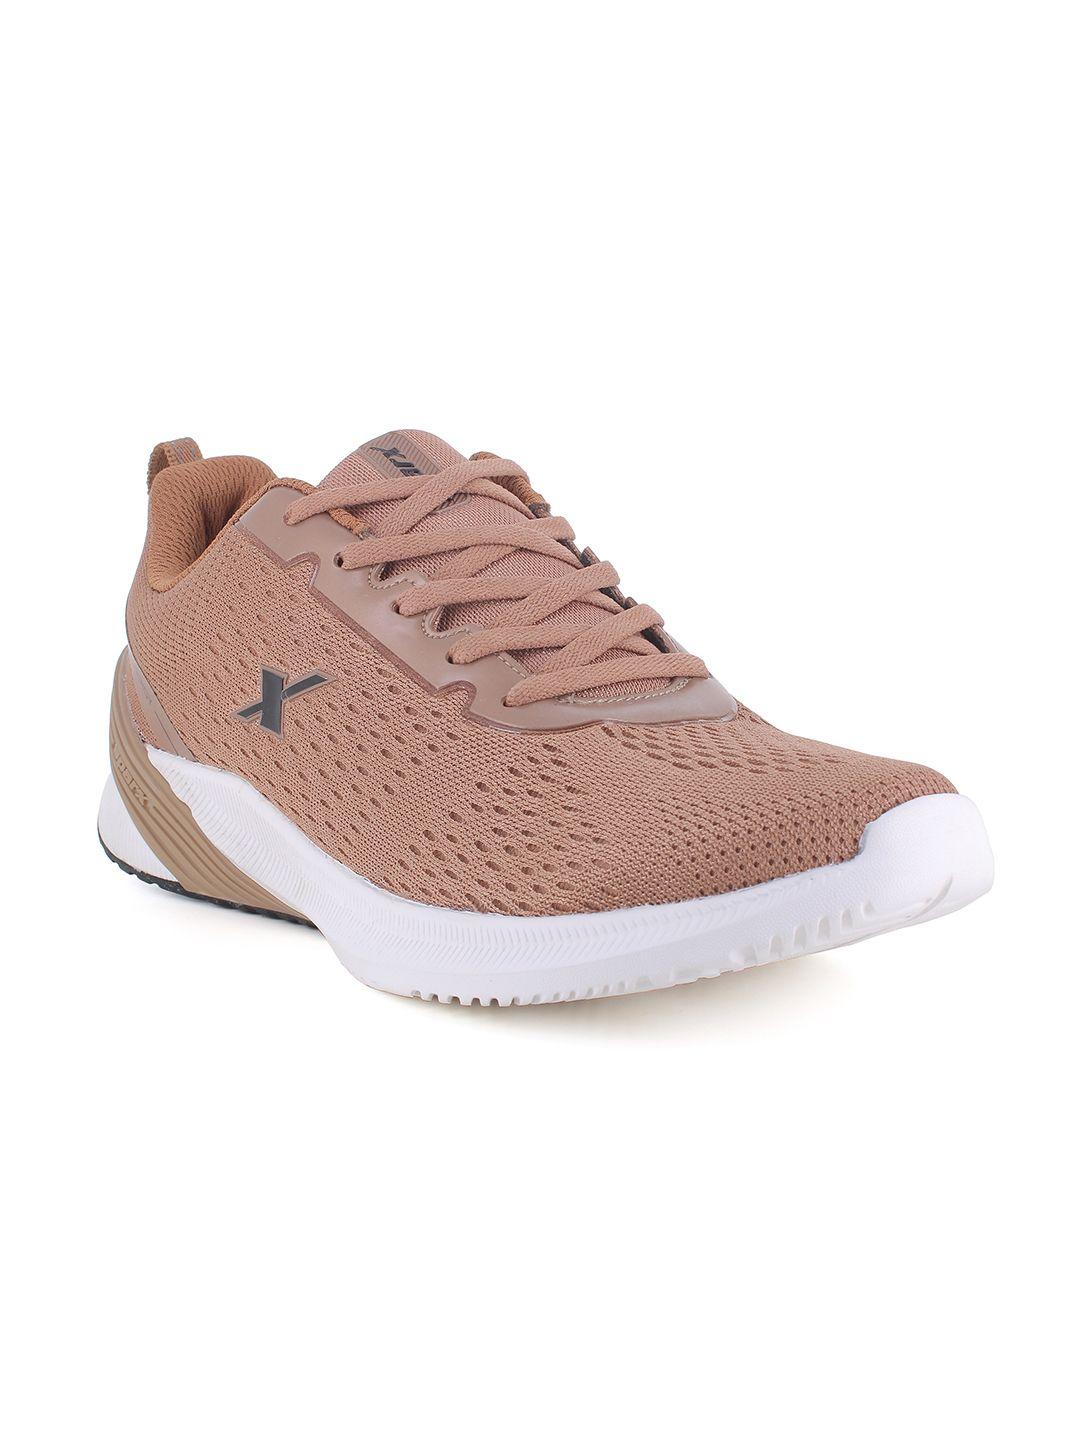 sparx men mesh running non-marking lace-up shoes